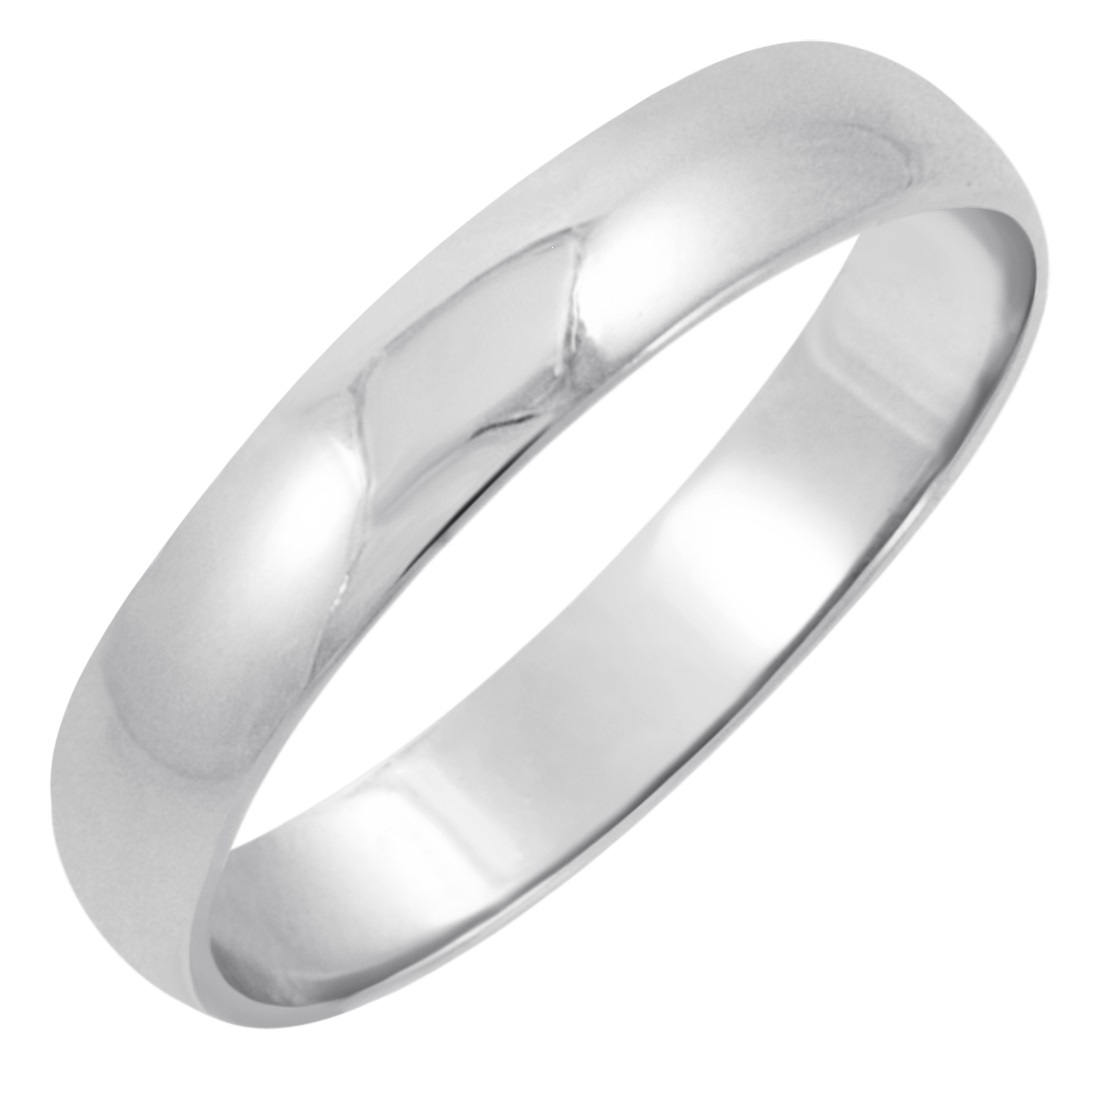 Oxford Ivy Men's 10K Yellow or White Gold 4mm Traditional Fit Plain Wedding Band (Available Ring Sizes 7-12 1/2)